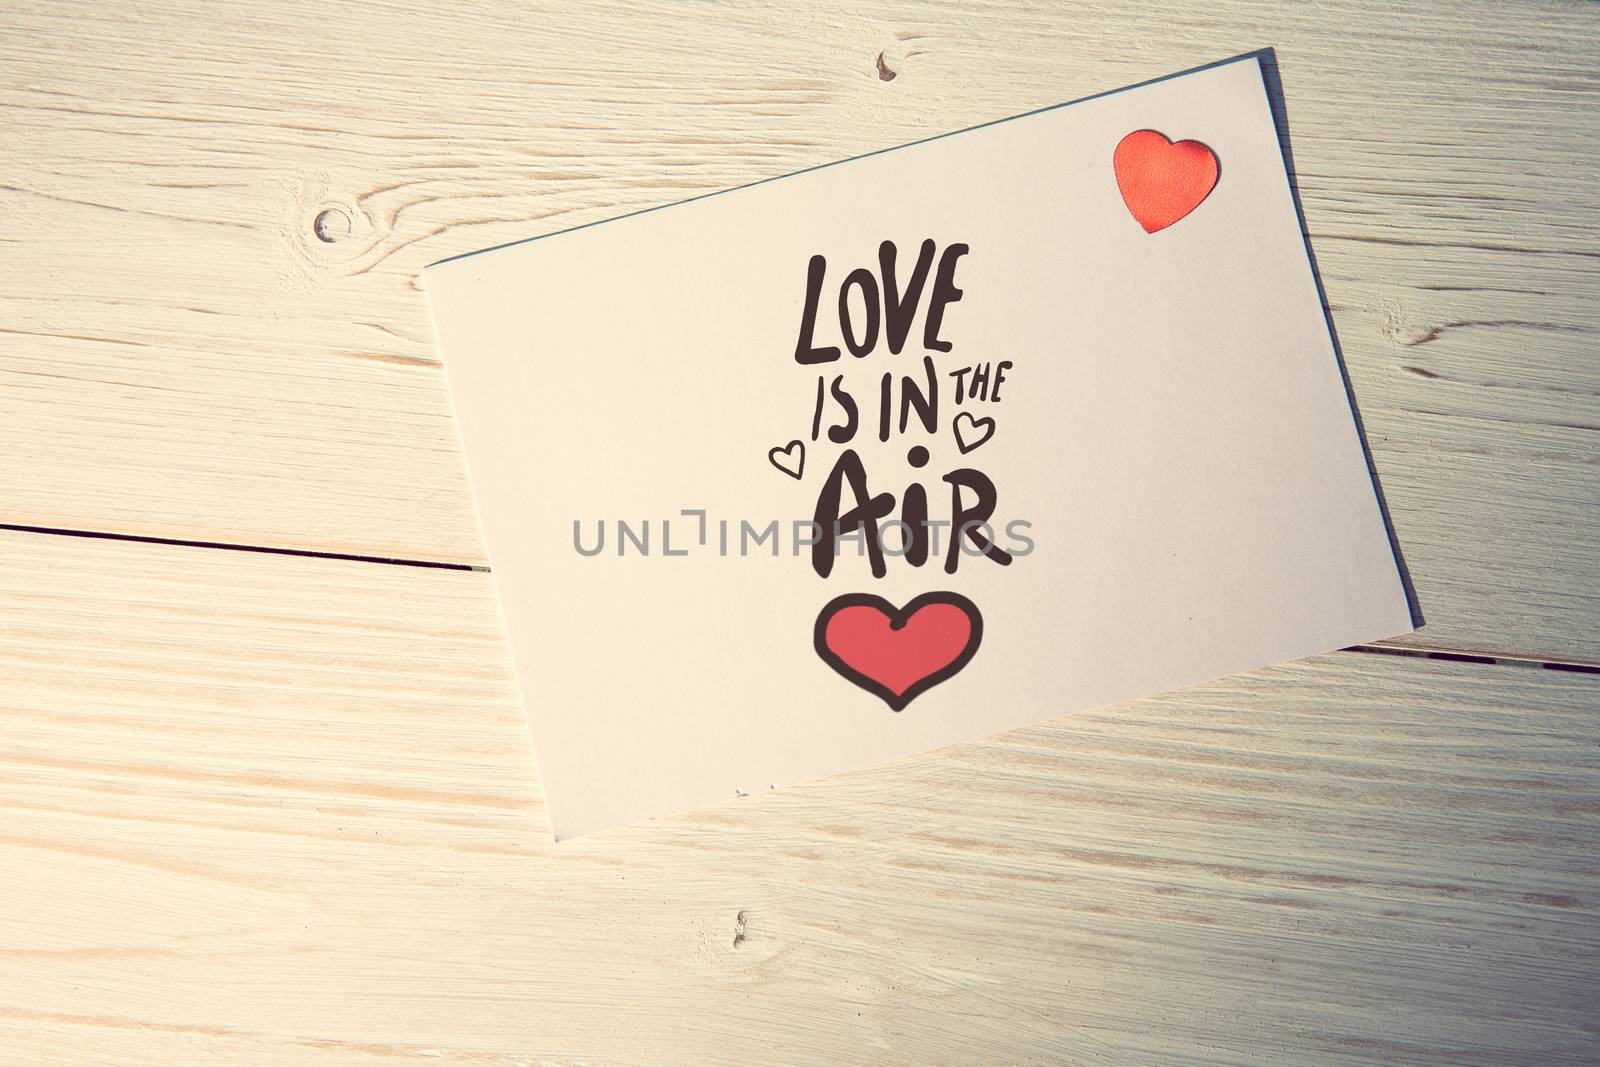 love is in the air against love letter